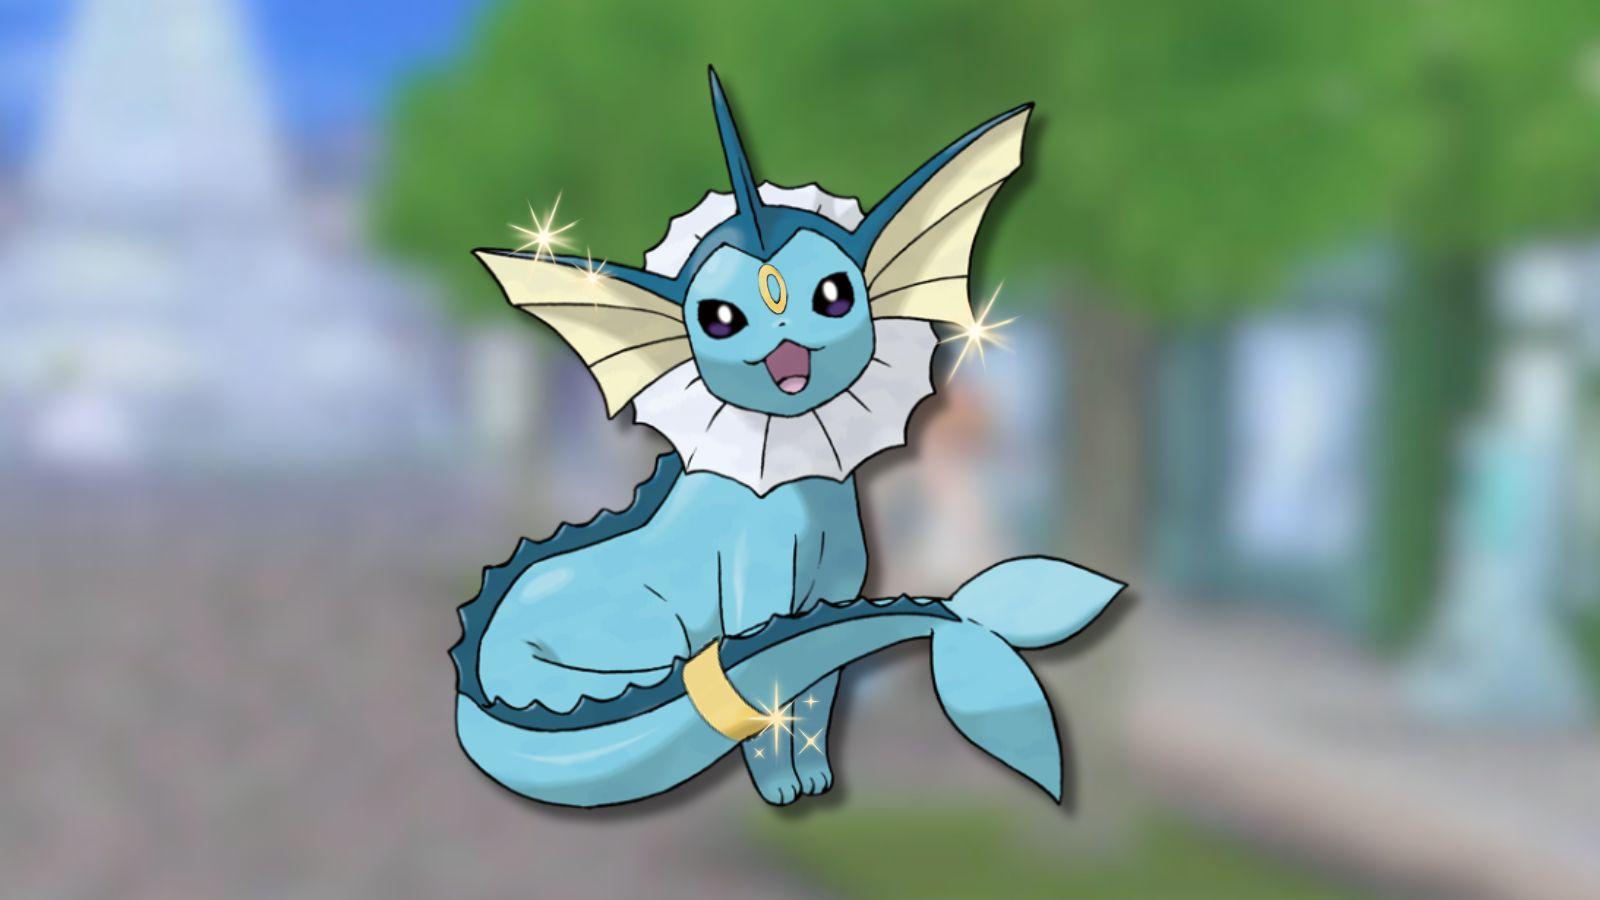 Vaporeon with Umbreon details with Pokemon X & Y background.